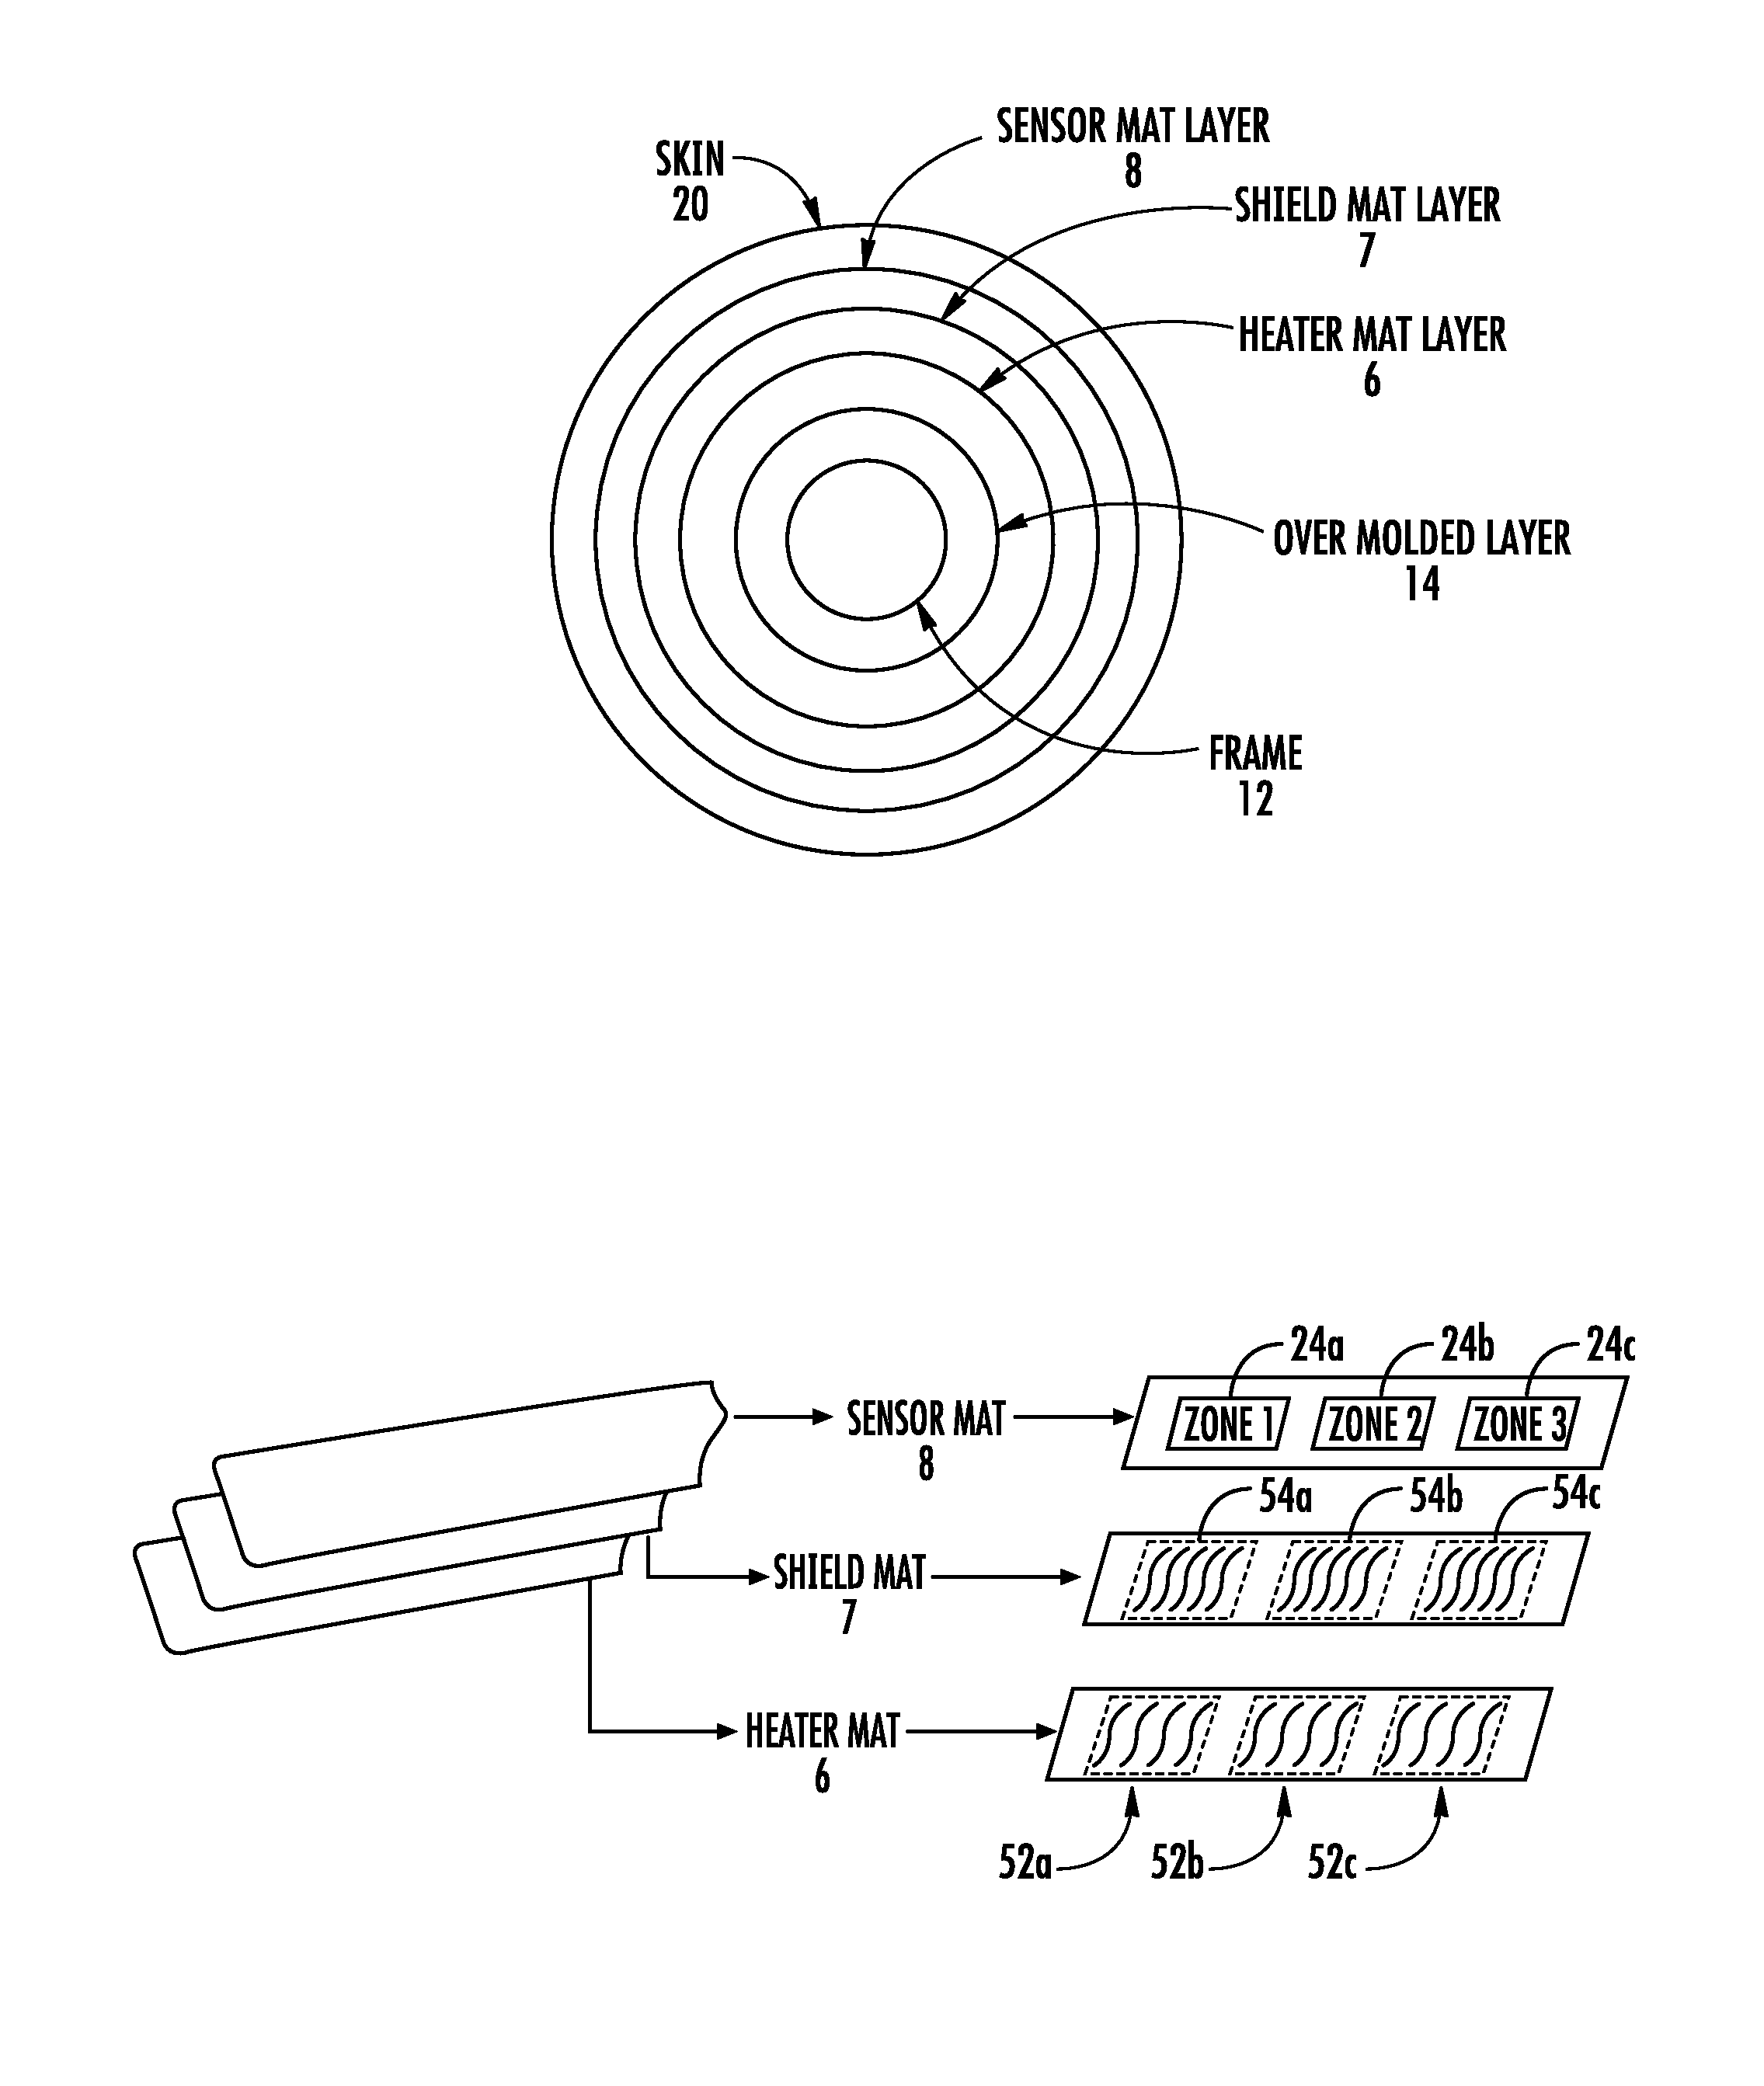 Systems and methods for shielding a hand sensor system in a steering wheel